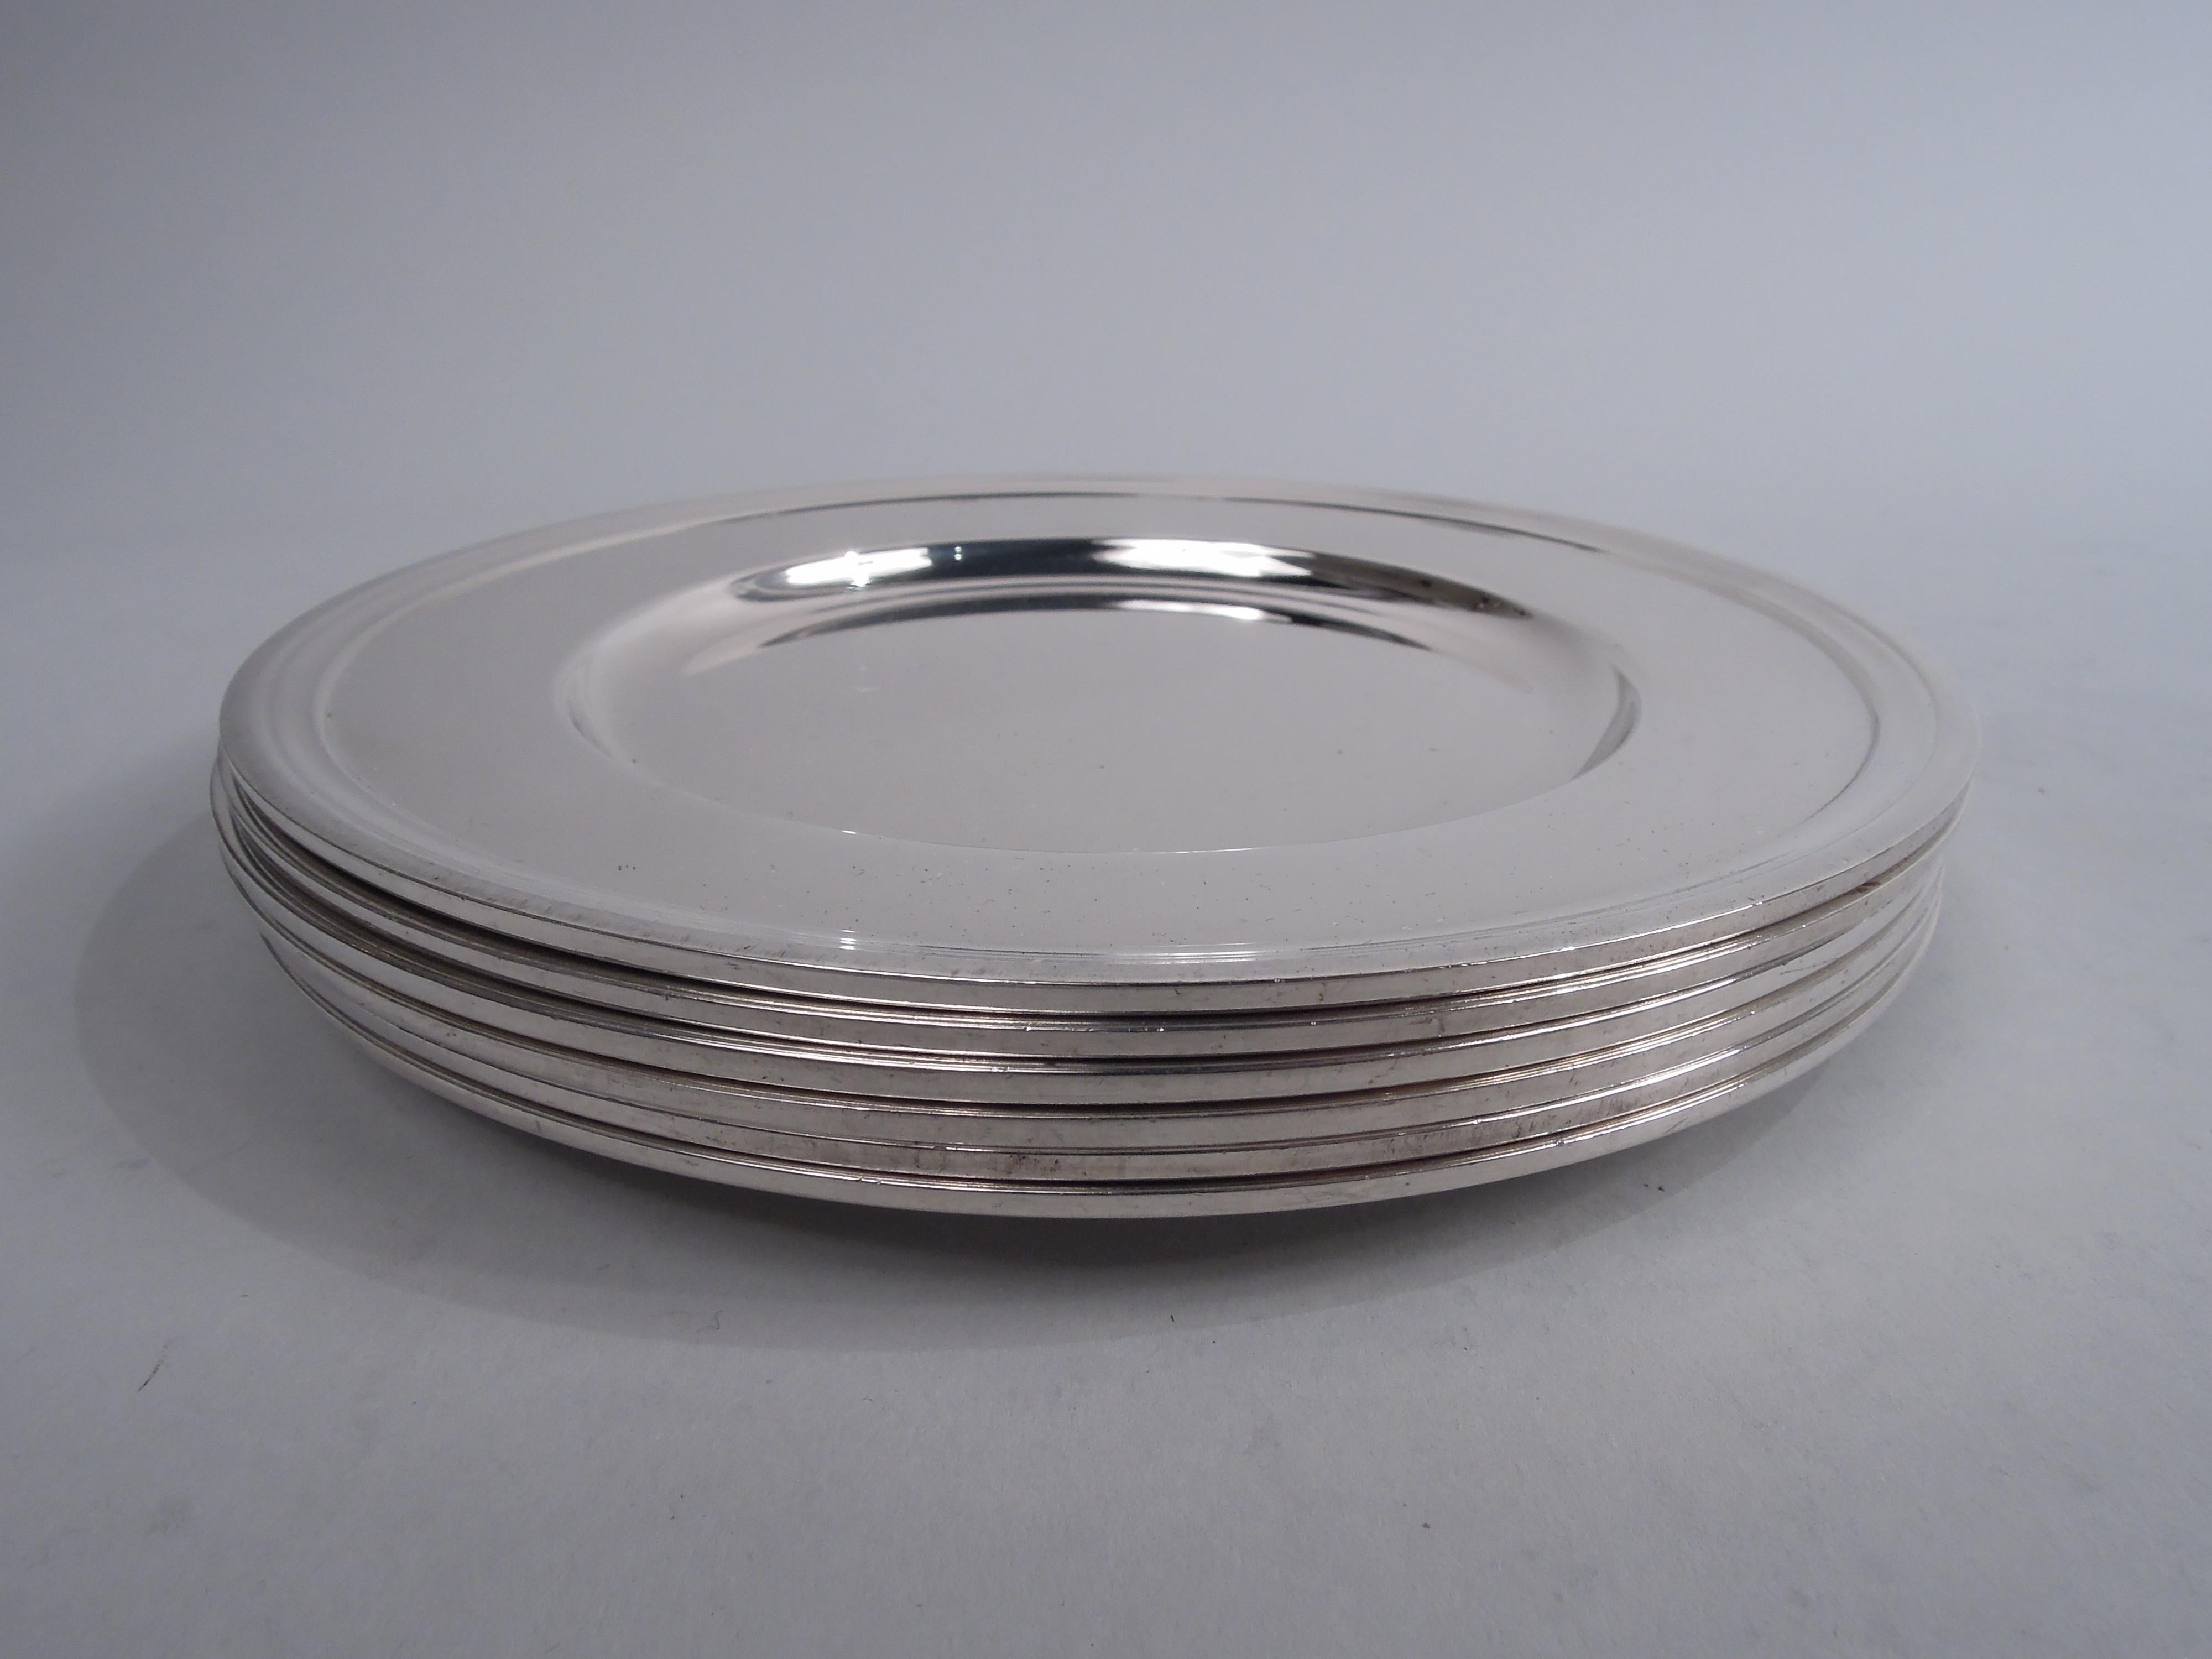 Set of 6 Modern sterling silver bread and butter plates. Made by Tiffany & Co. in New York. Each: Deep well, wide shoulder, and molded rim. Fully marked including maker’s stamp, pattern no. 20198, and director’s letter L (1956-ca 65). Total weight: